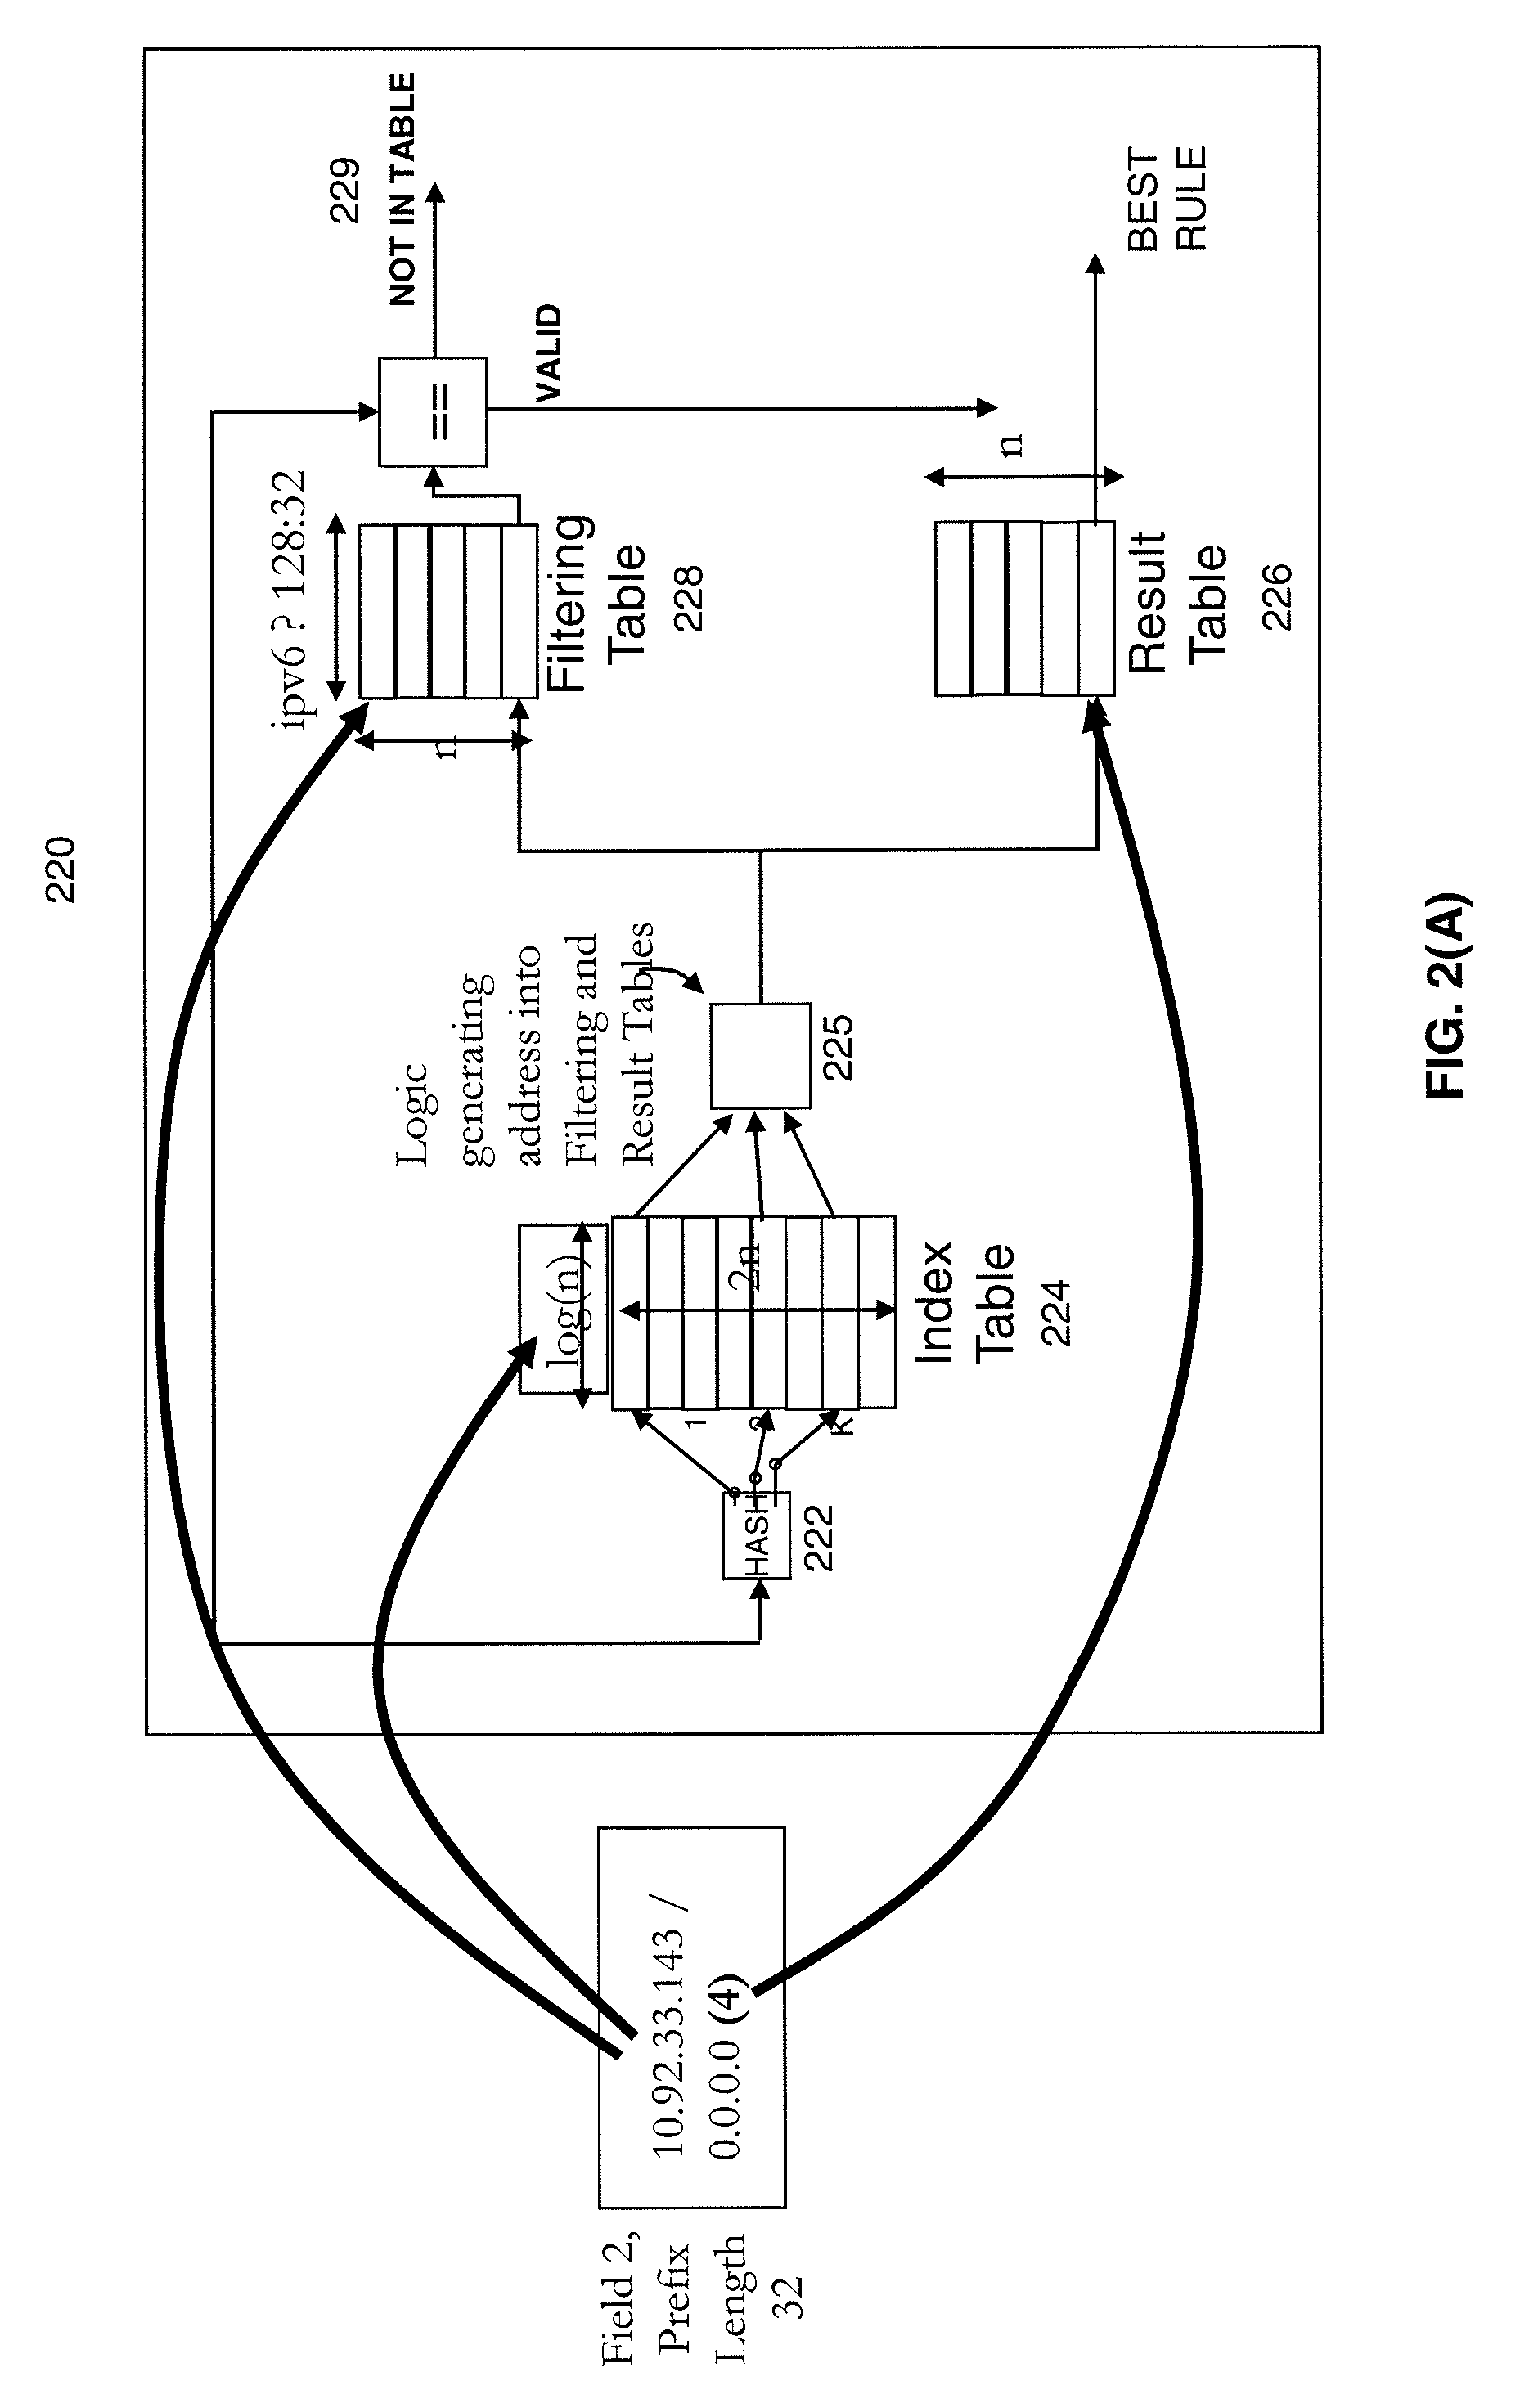 Information retrieval architecture for packet classification